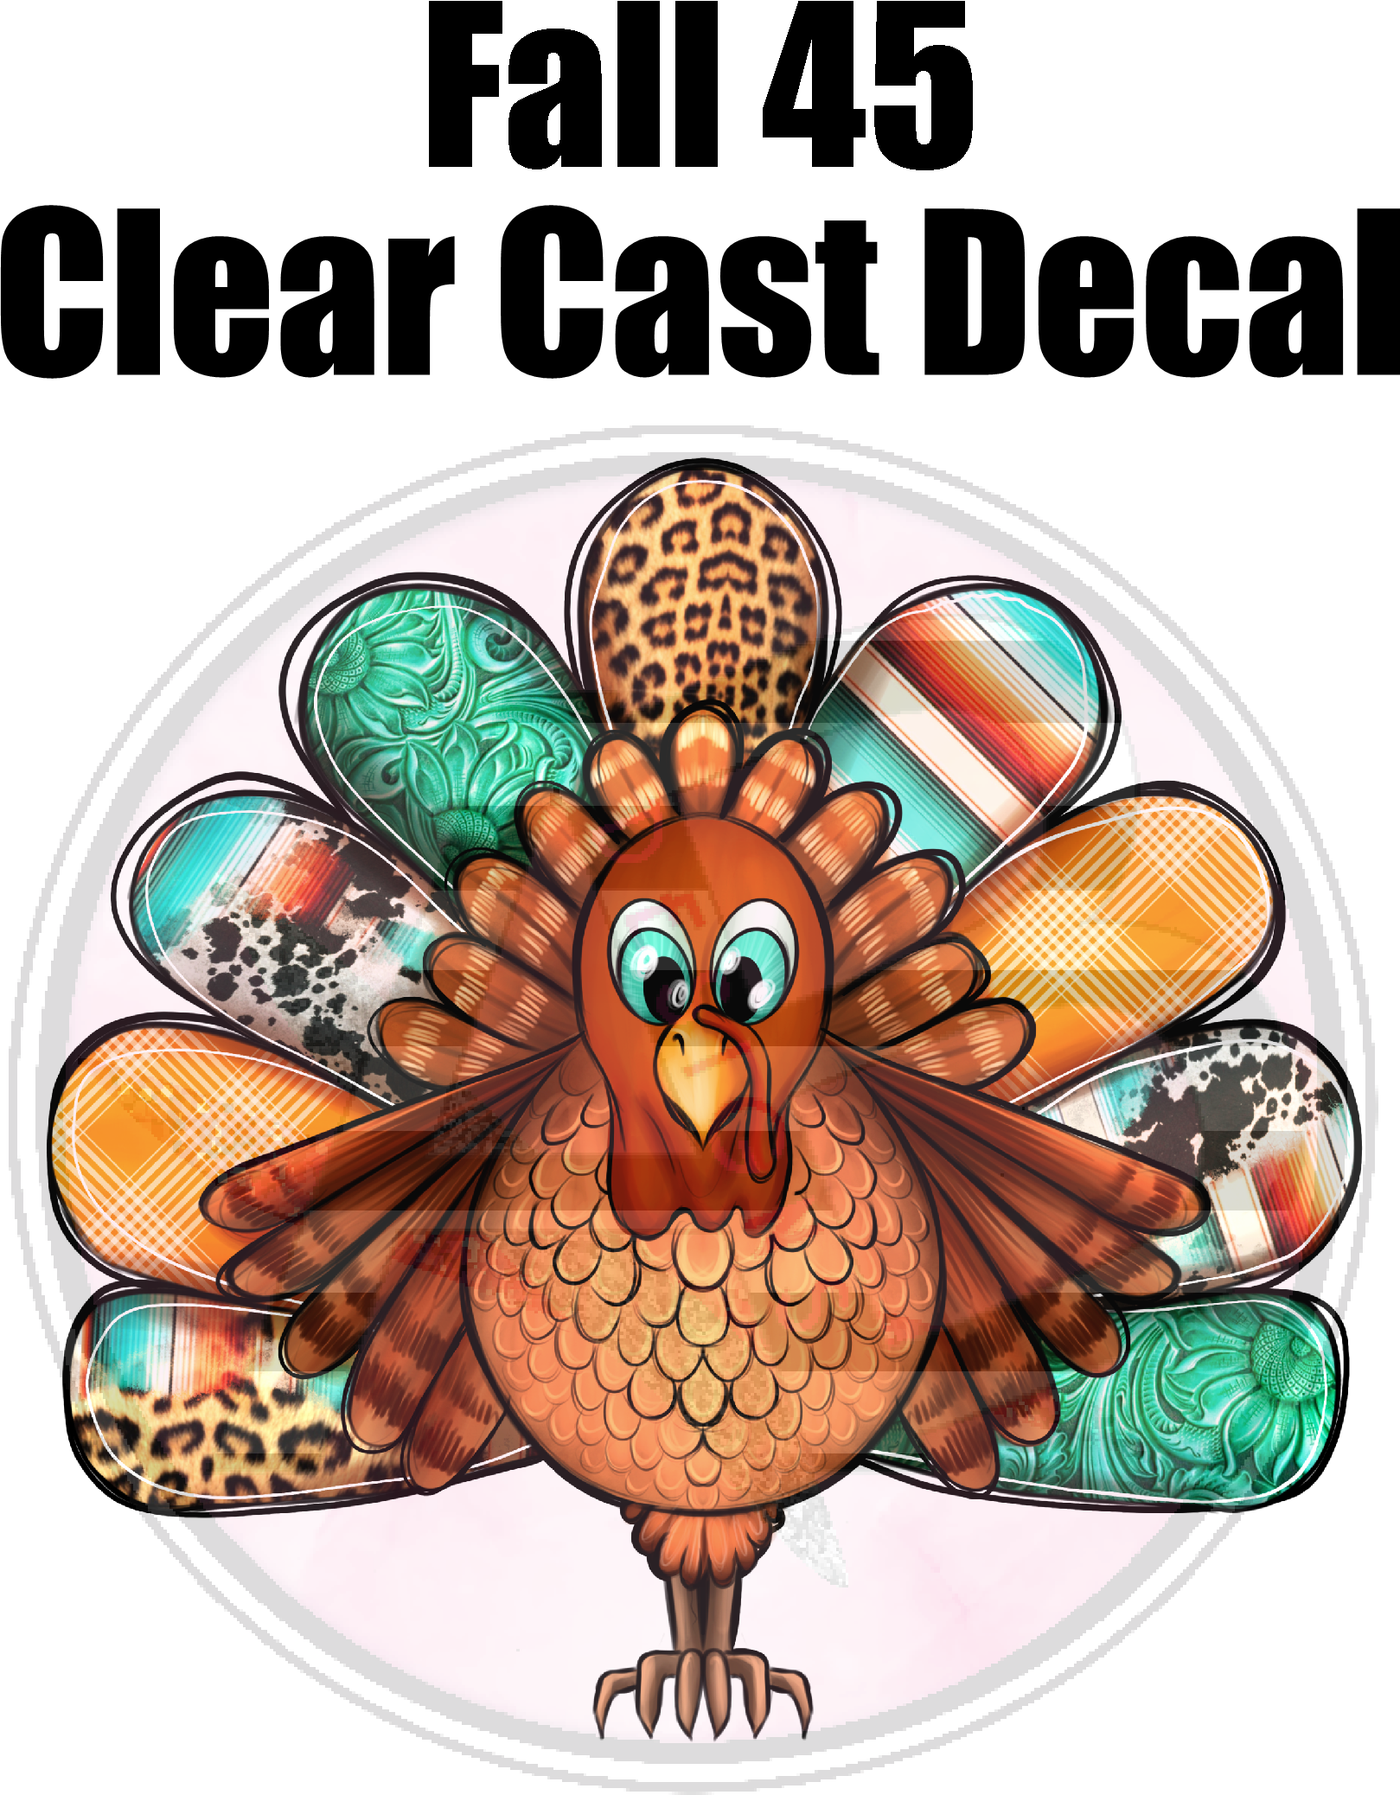 Fall 45 - Clear Cast Decal